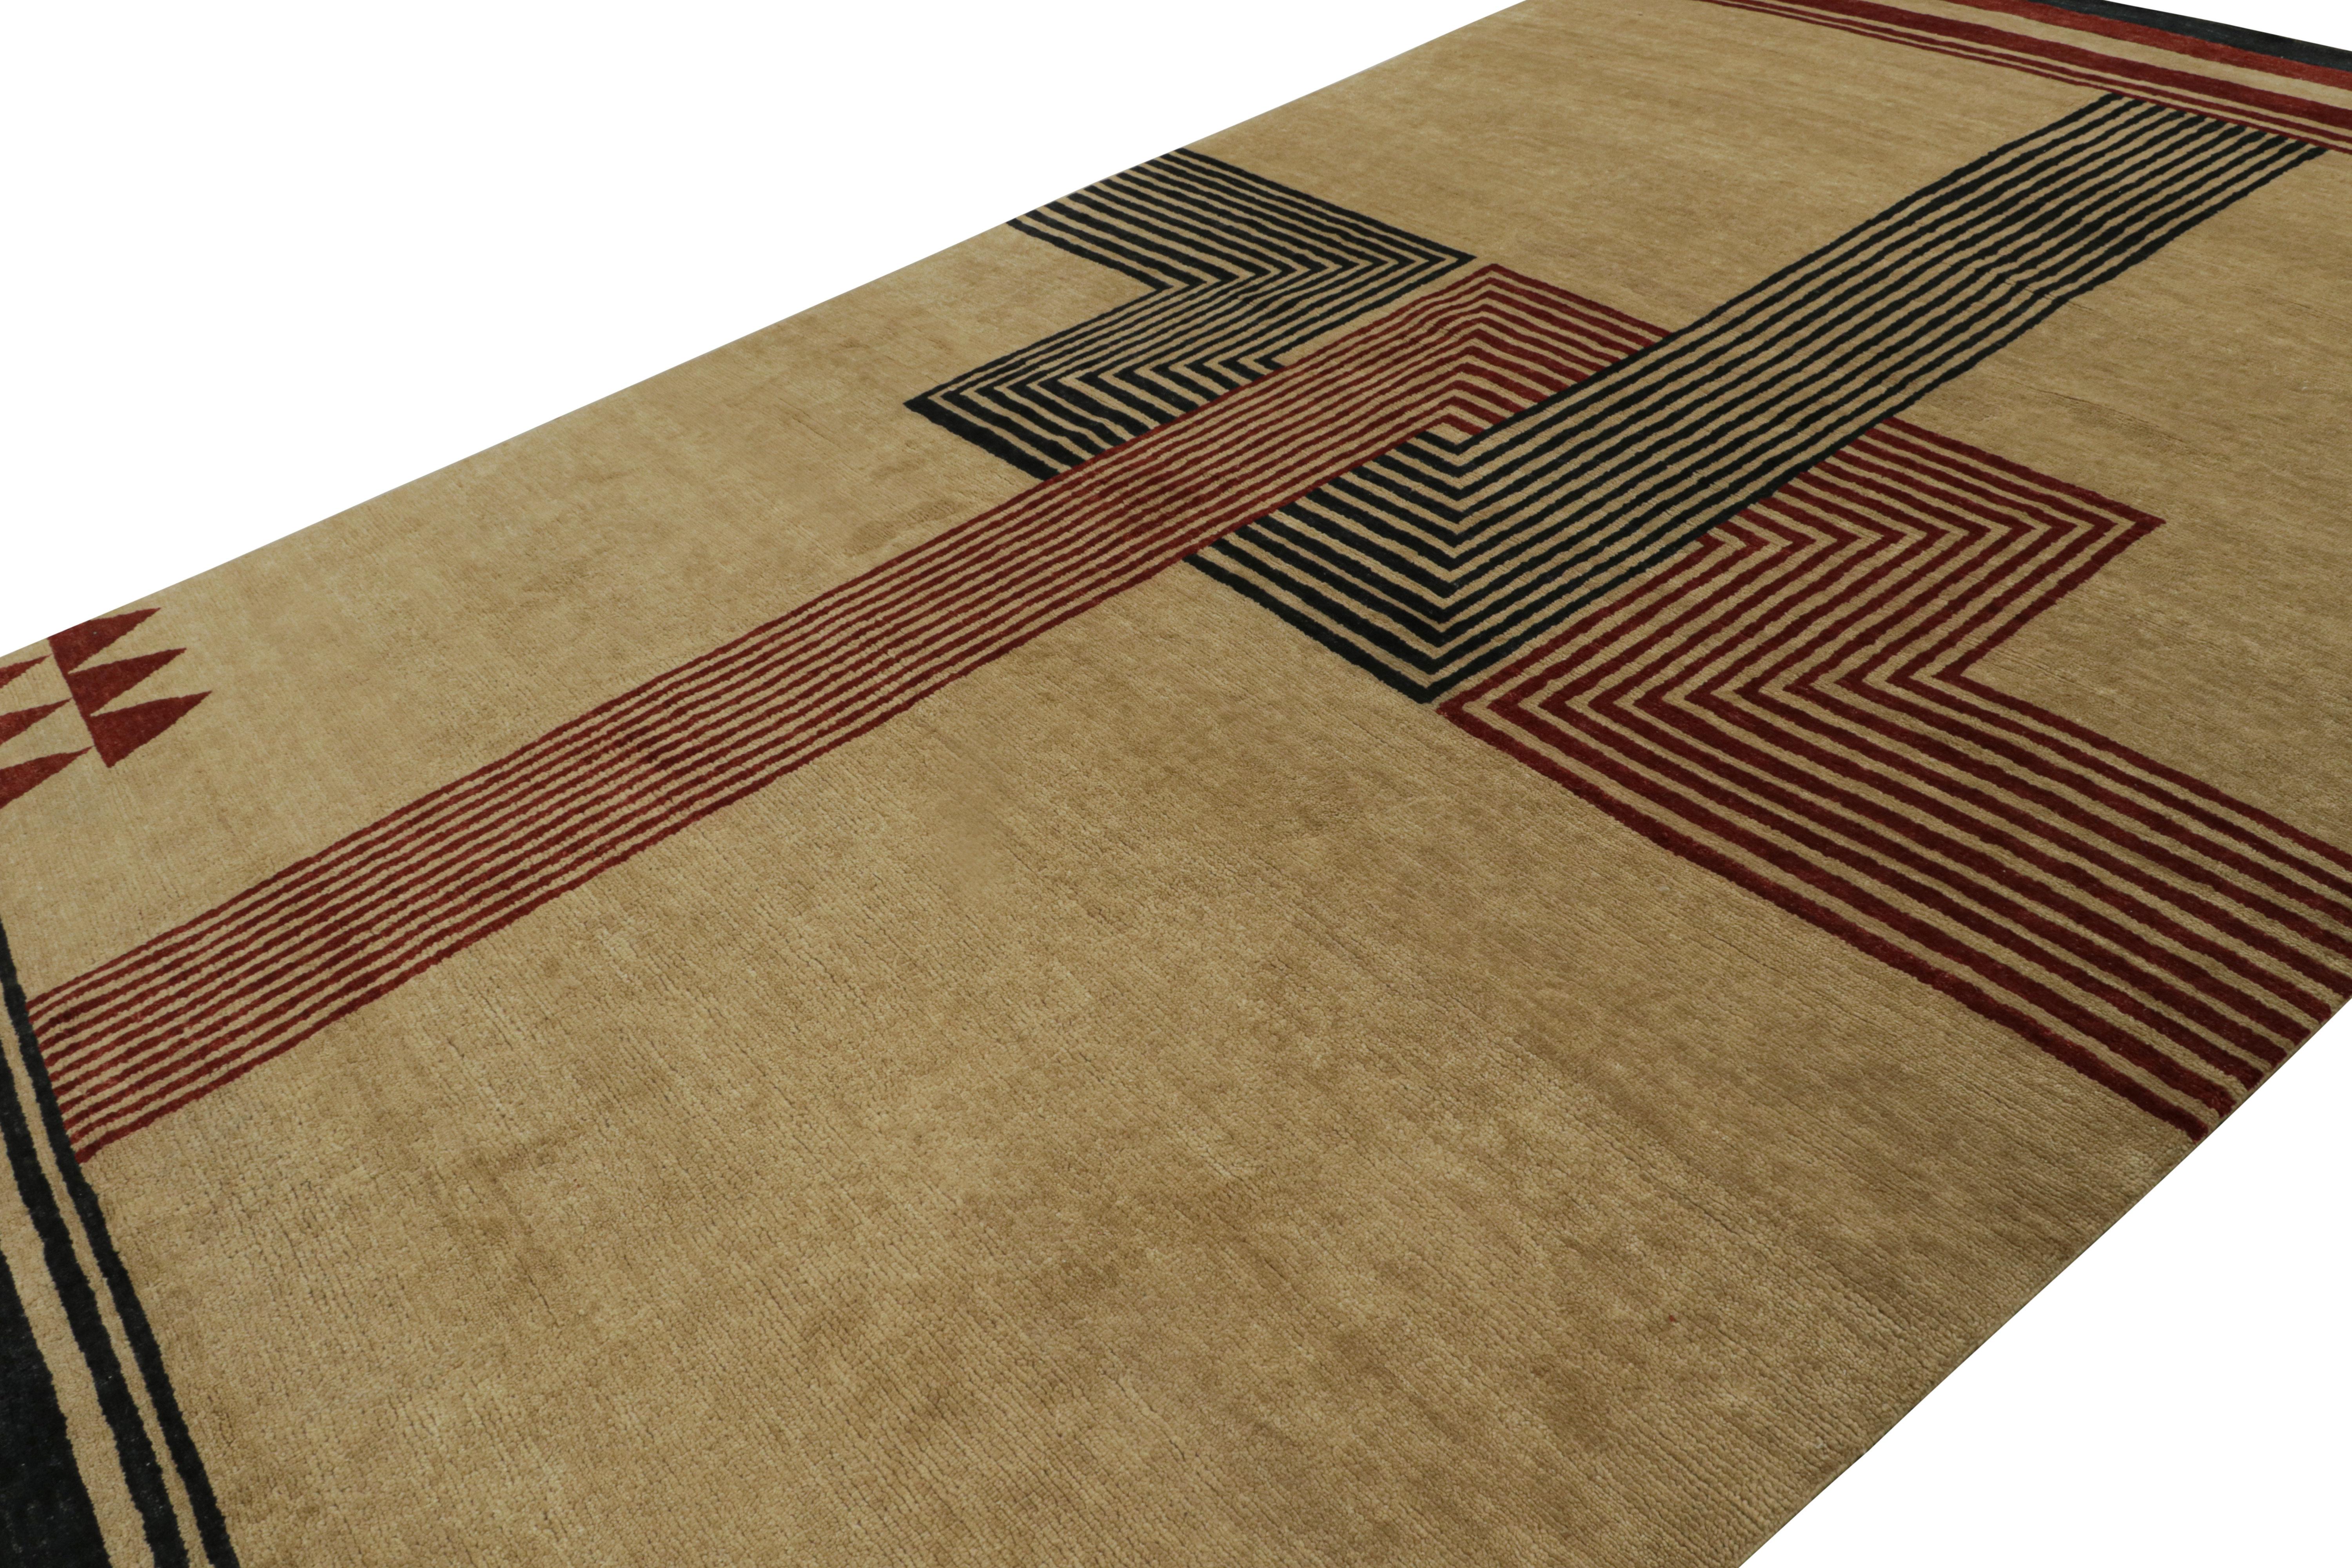 Hand-knotted in wool, this 9x16 modern rug by Rug & Kilim is a new addition to the French Art Deco rug line. Its design is inspired by a 1920s Bruhns-esque pattern of rectilinear geometric patterns and cubist sensibilities. 

On the Design: 

As